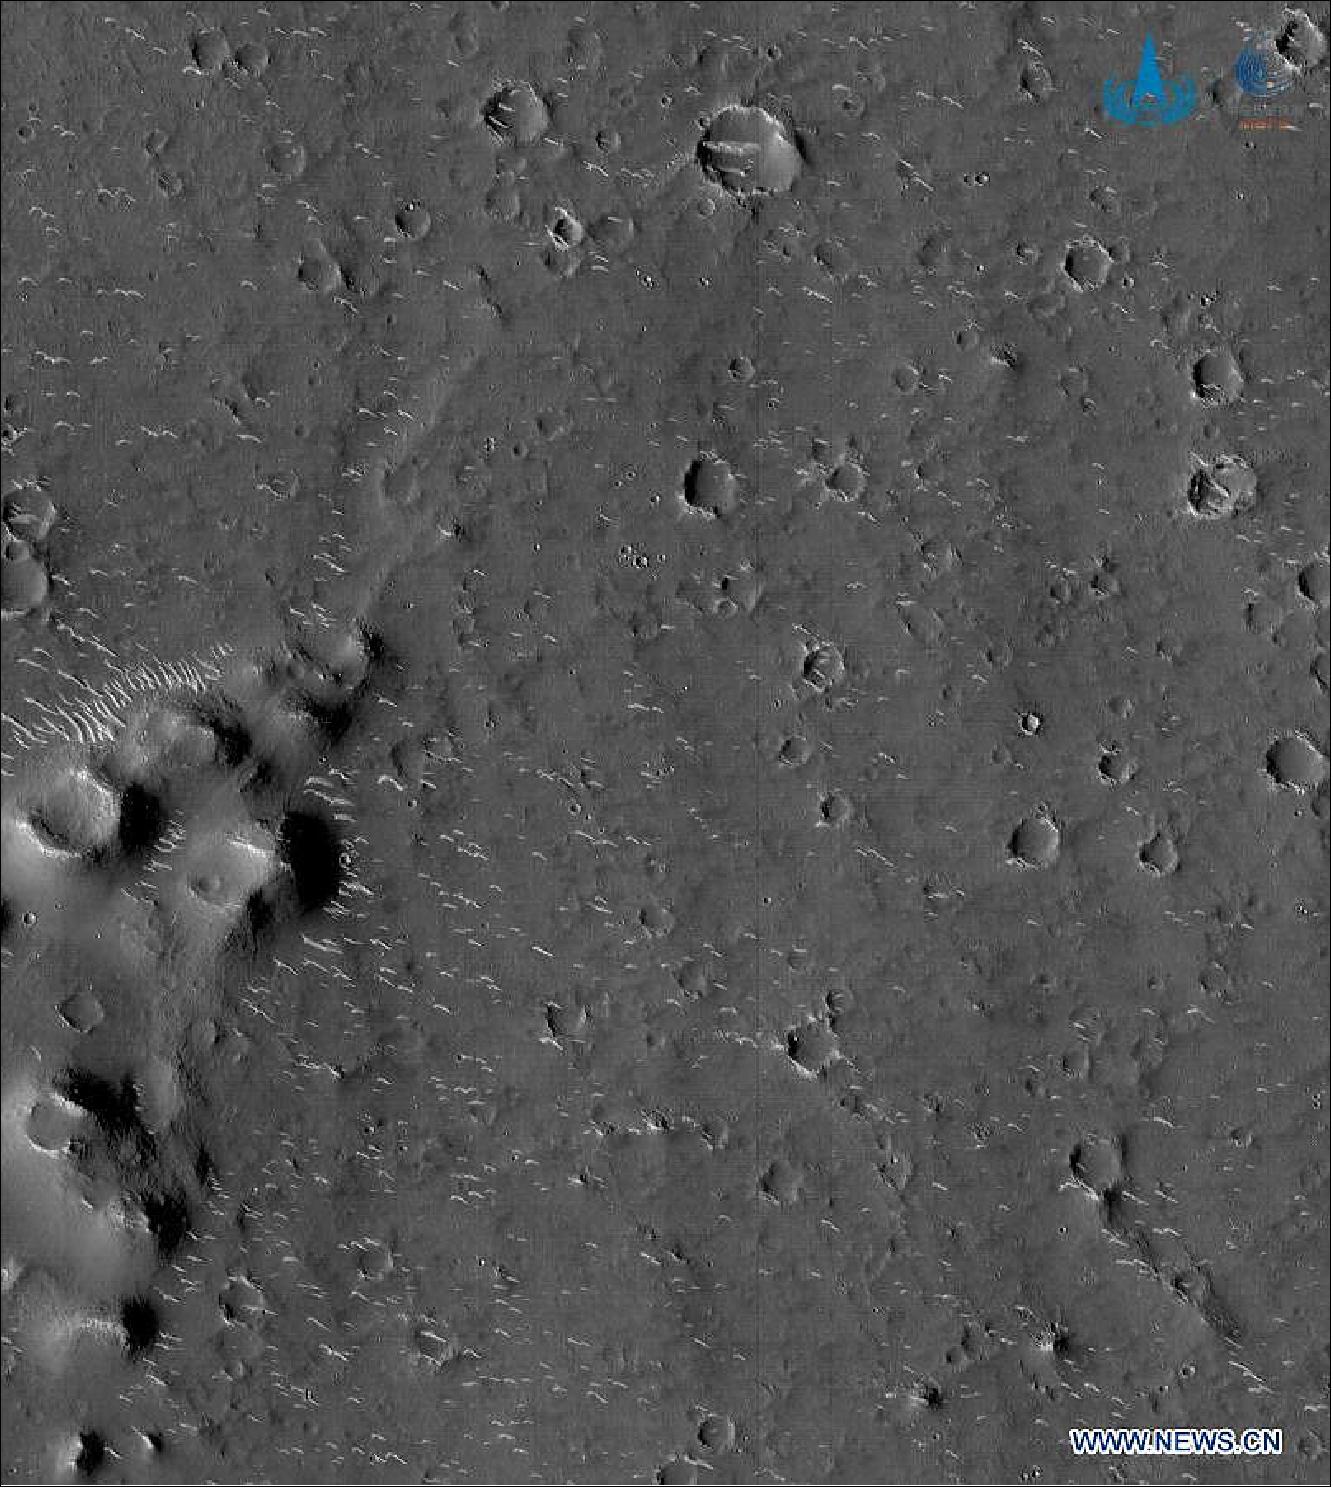 Figure 23: CNSA released on 4 March 2021 high-resolution panchromatic images of Mars captured by the country's Tianwen-1 probe (image credit: CNSA)